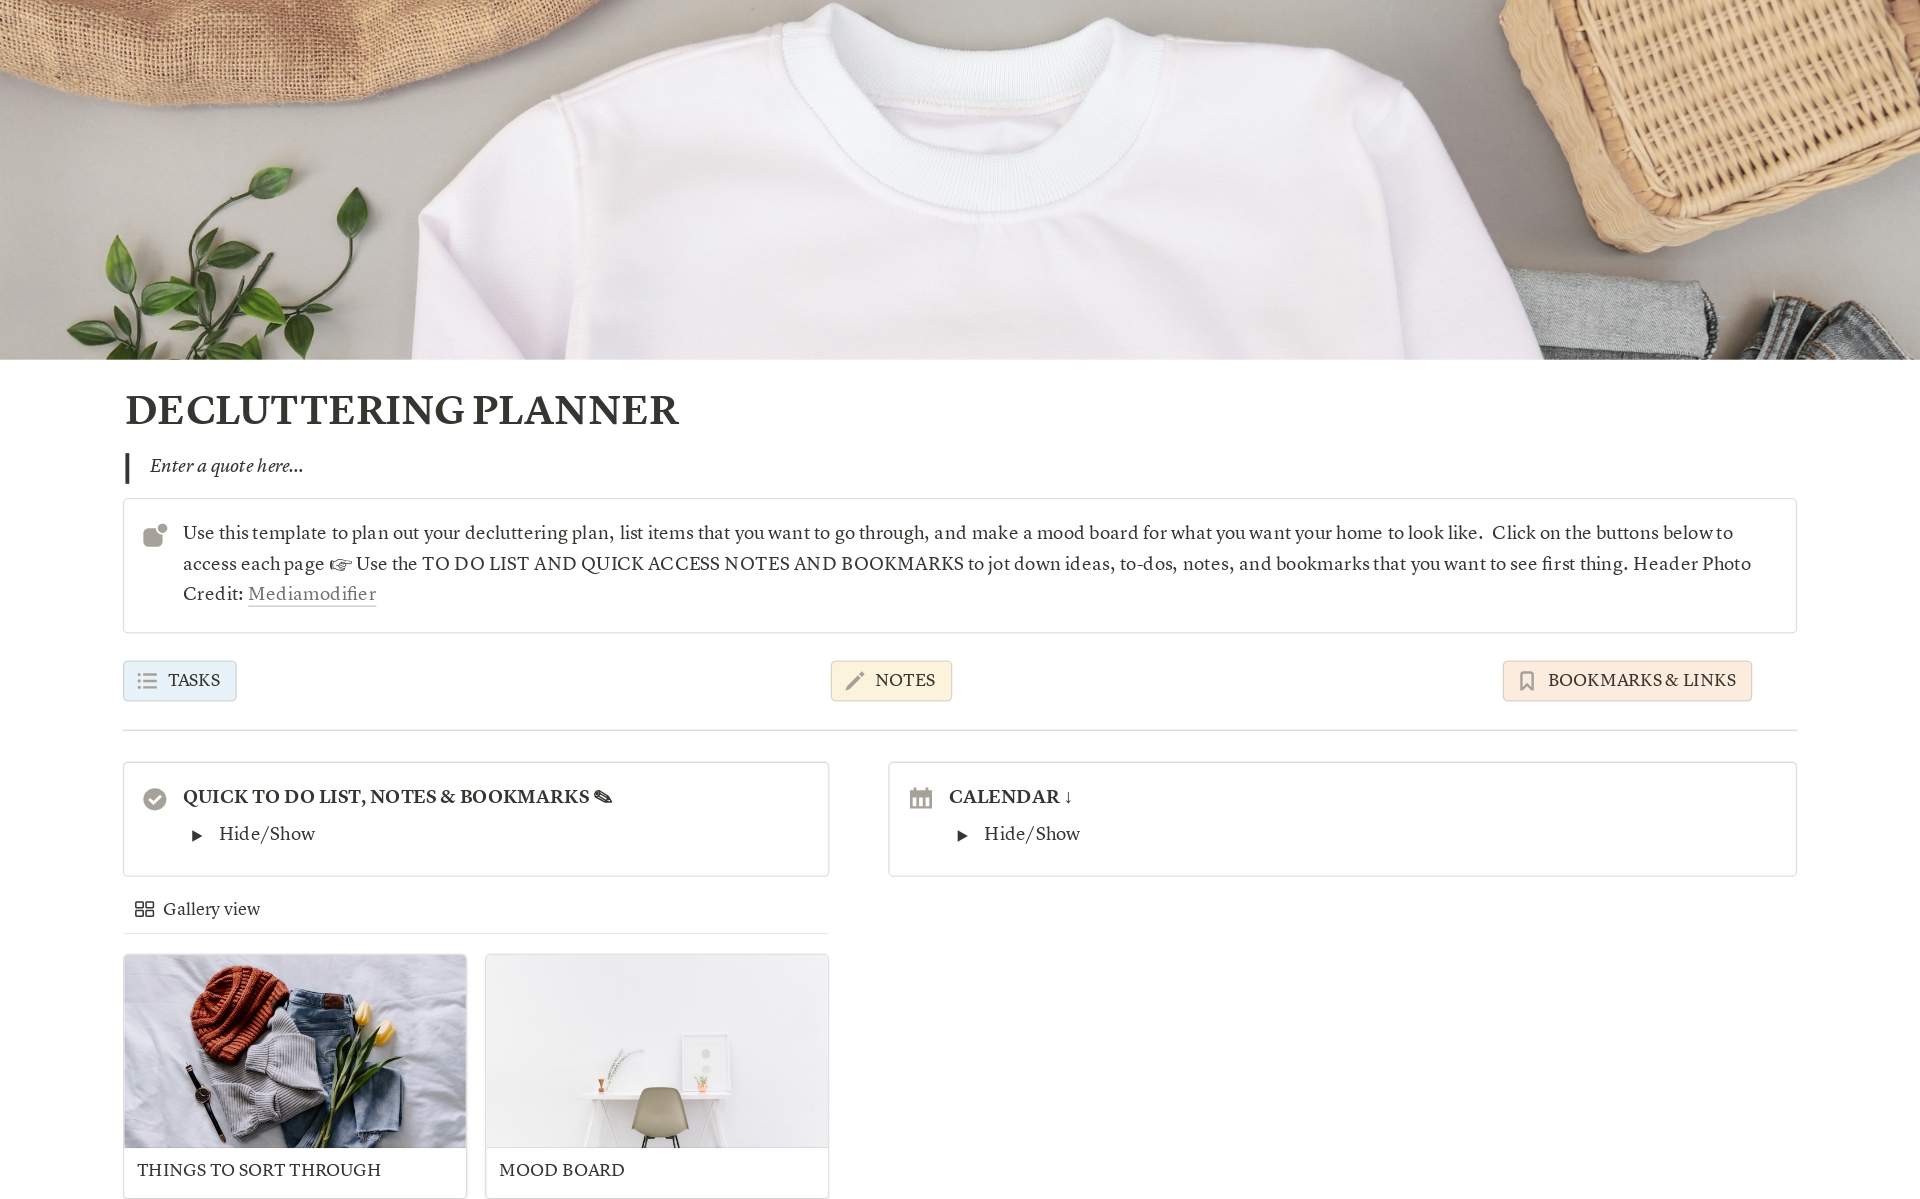 This decluttering planner is designed to help you start your decluttering journey by allowing you to plan out your tasks and the items you need to sort through.